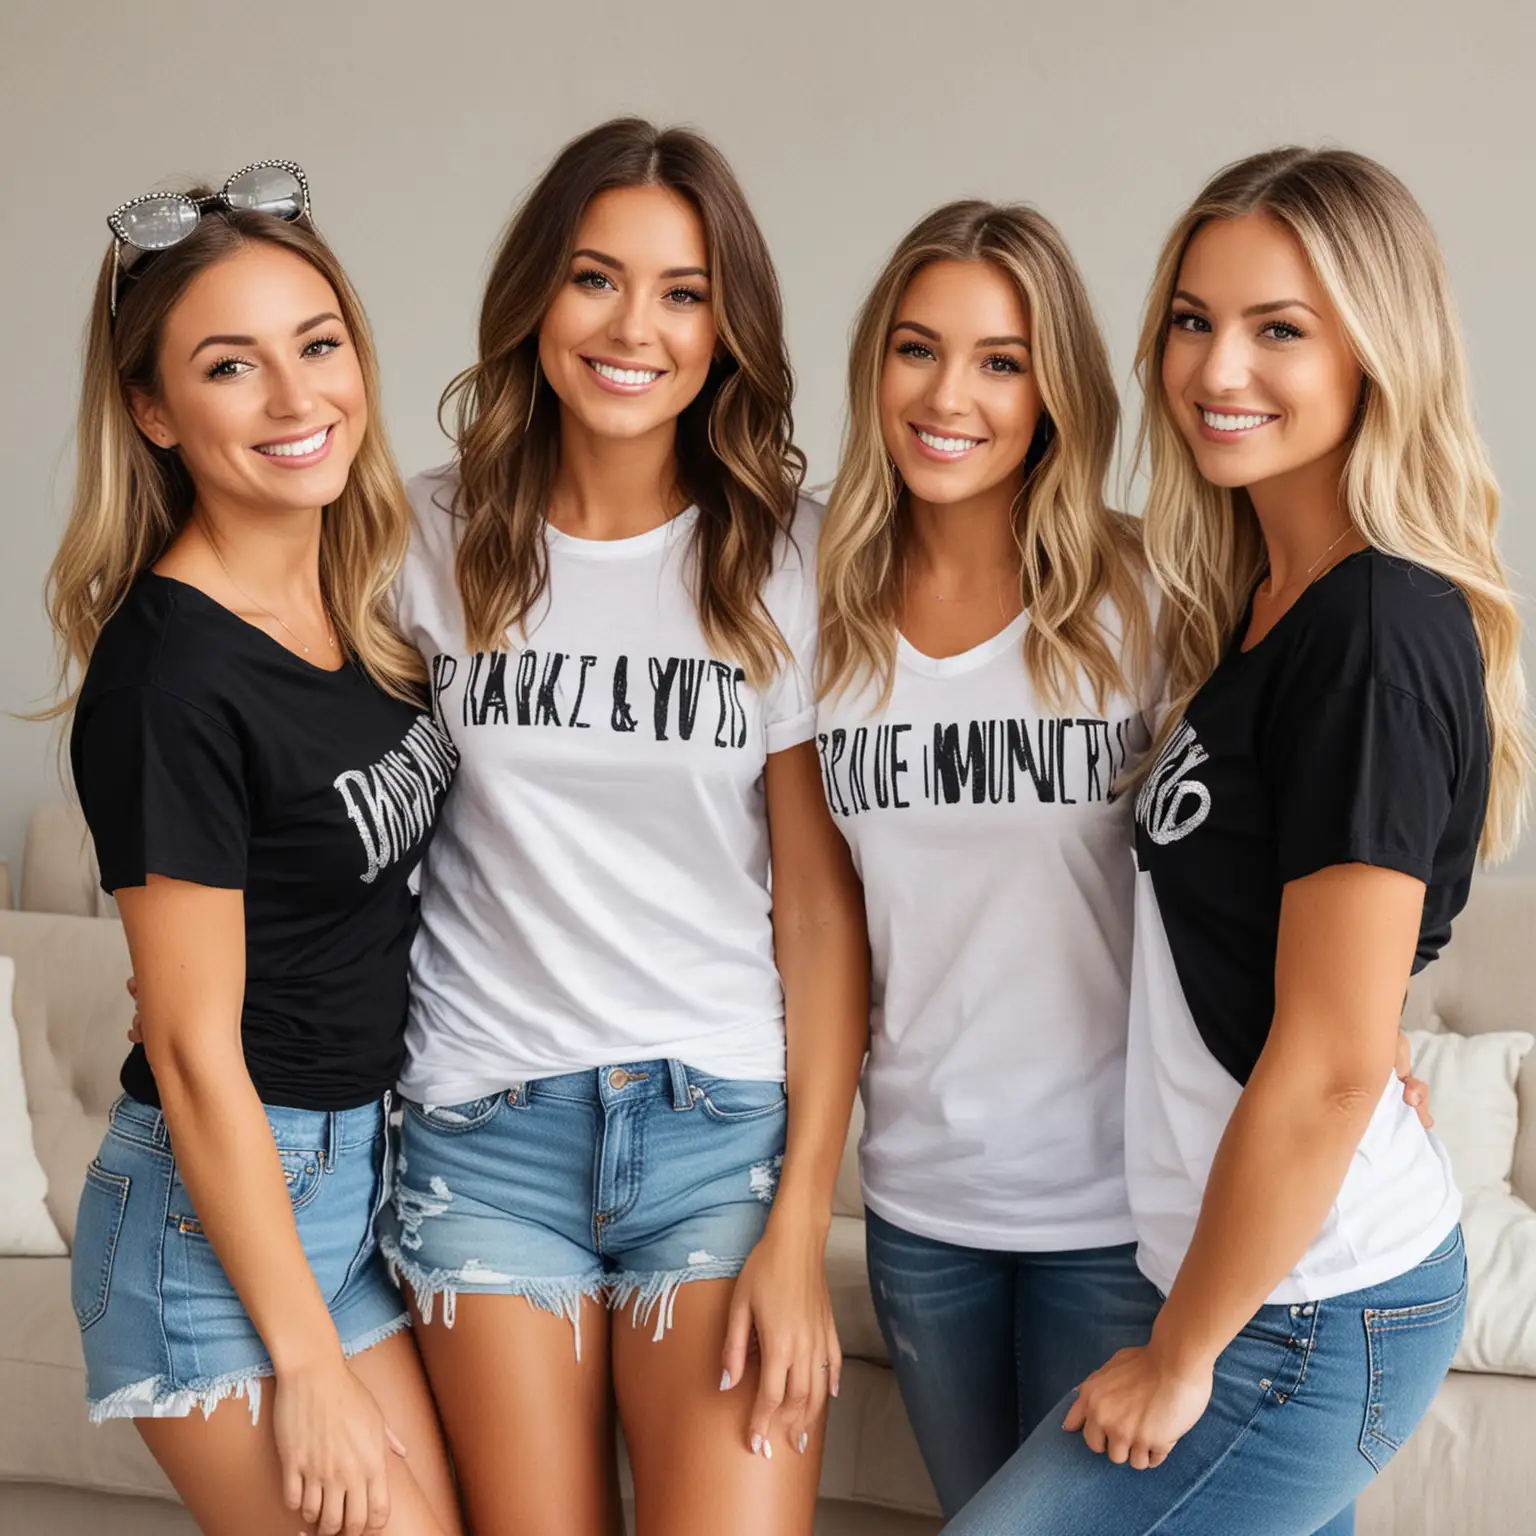 4 females at a bachelorette party.  one of the females should have on a white tee.  the other 3 females should be wearing black tees.